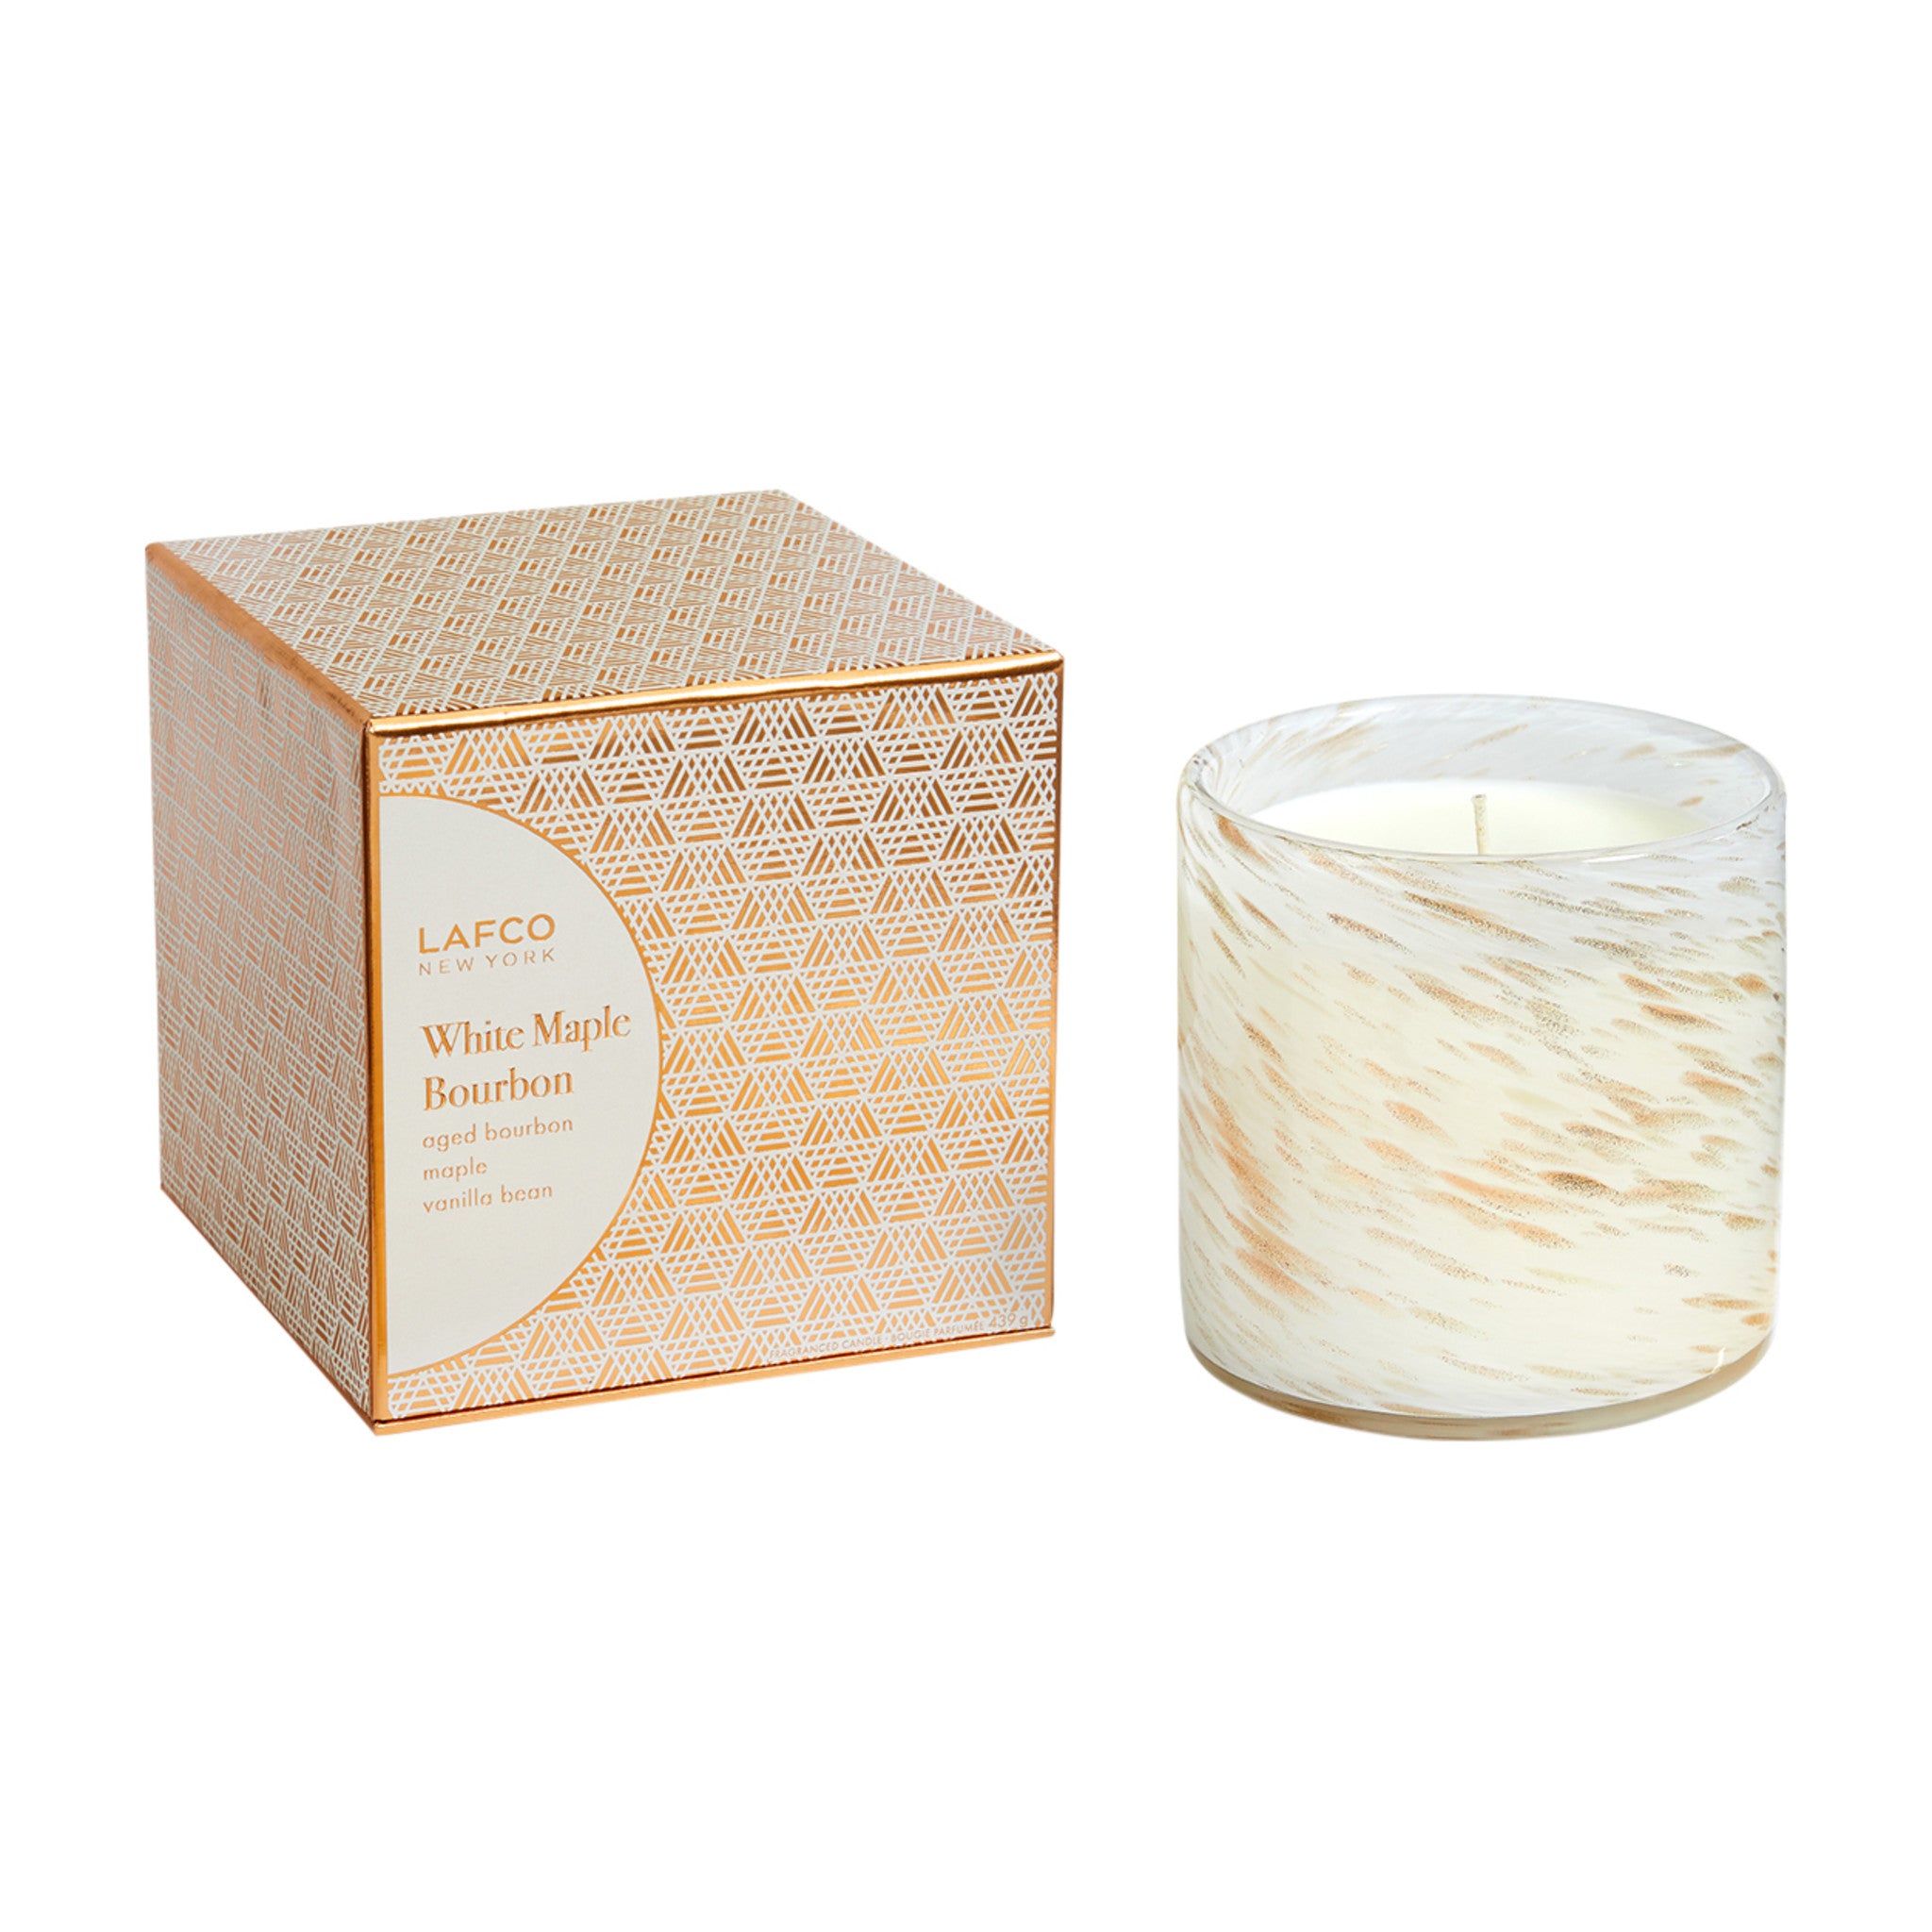 Lafco White Maple Bourbon Candle (Limited Edition) Size variant: 15.5 oz (Signature) main image.